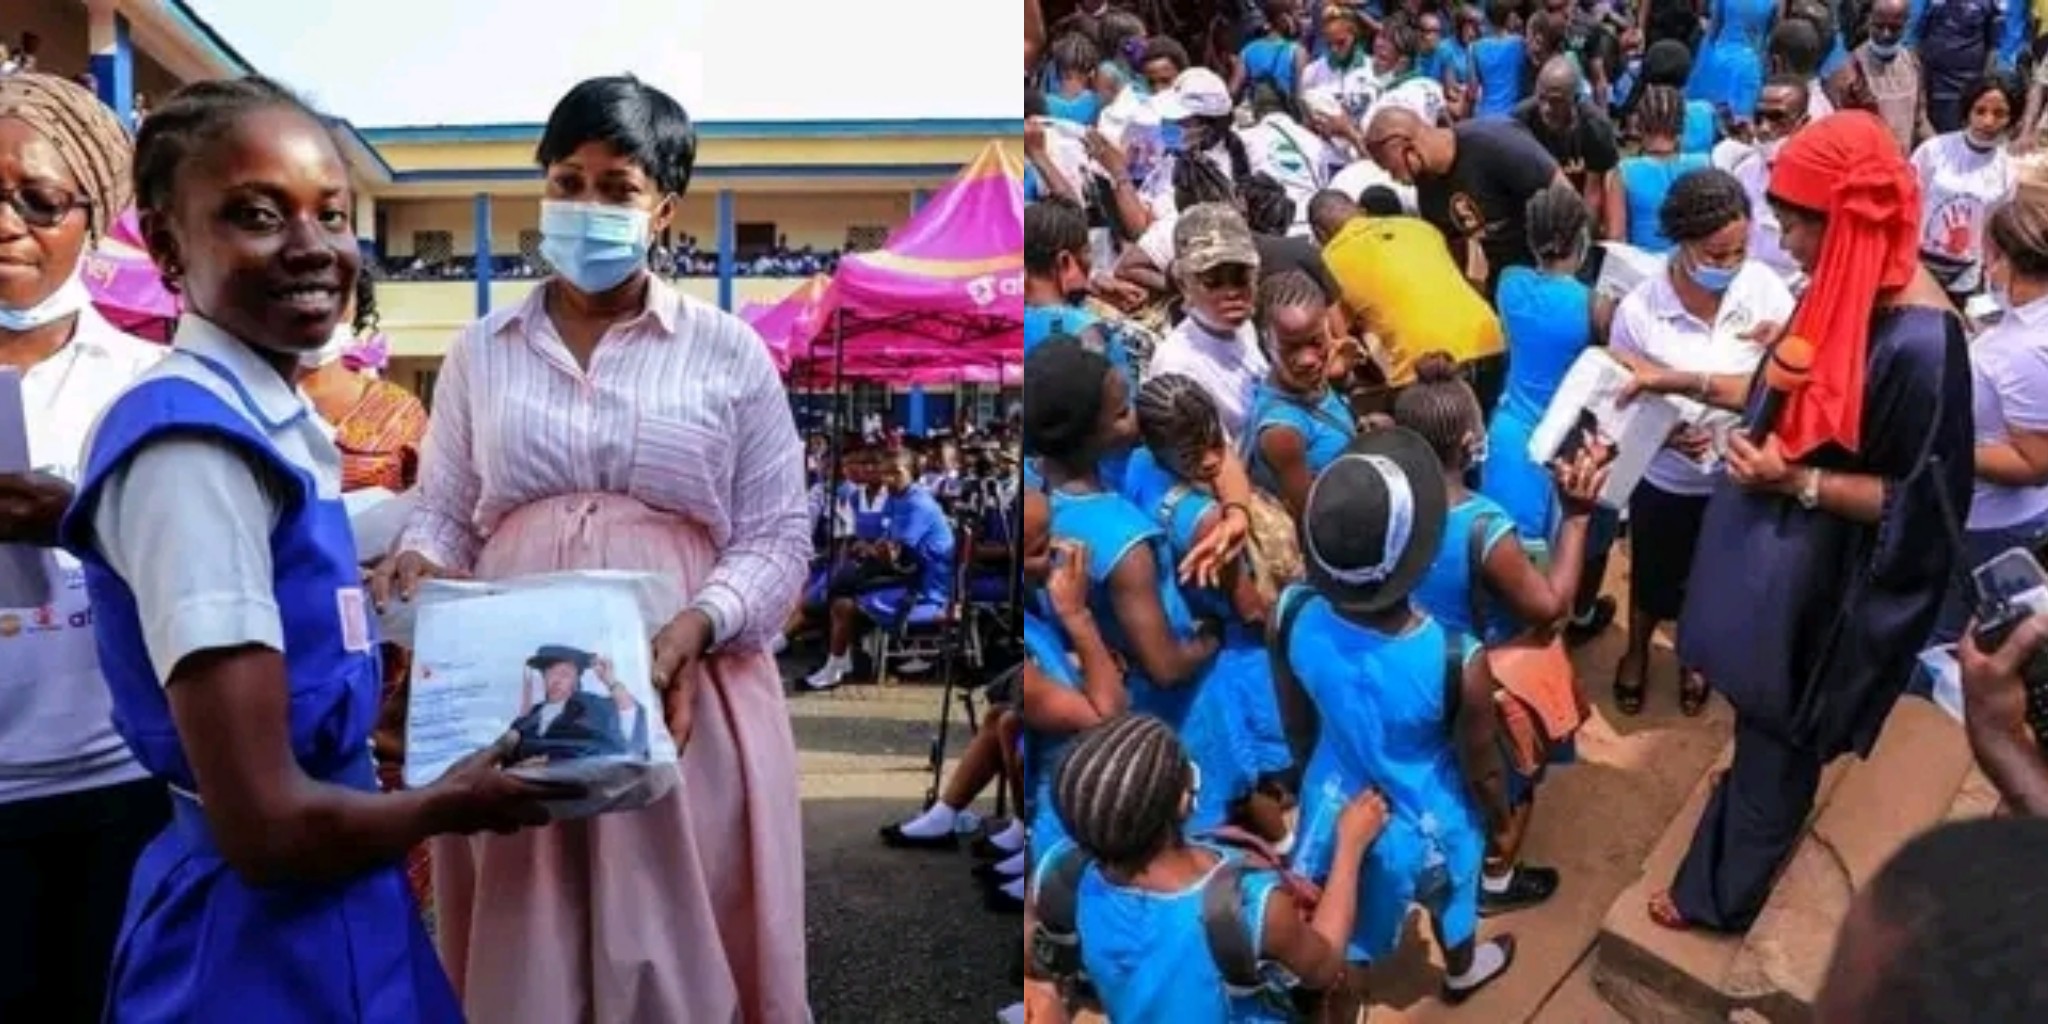 First Lady Fatima Bio Calls For Access to Free Sanitary Pads For School Girls